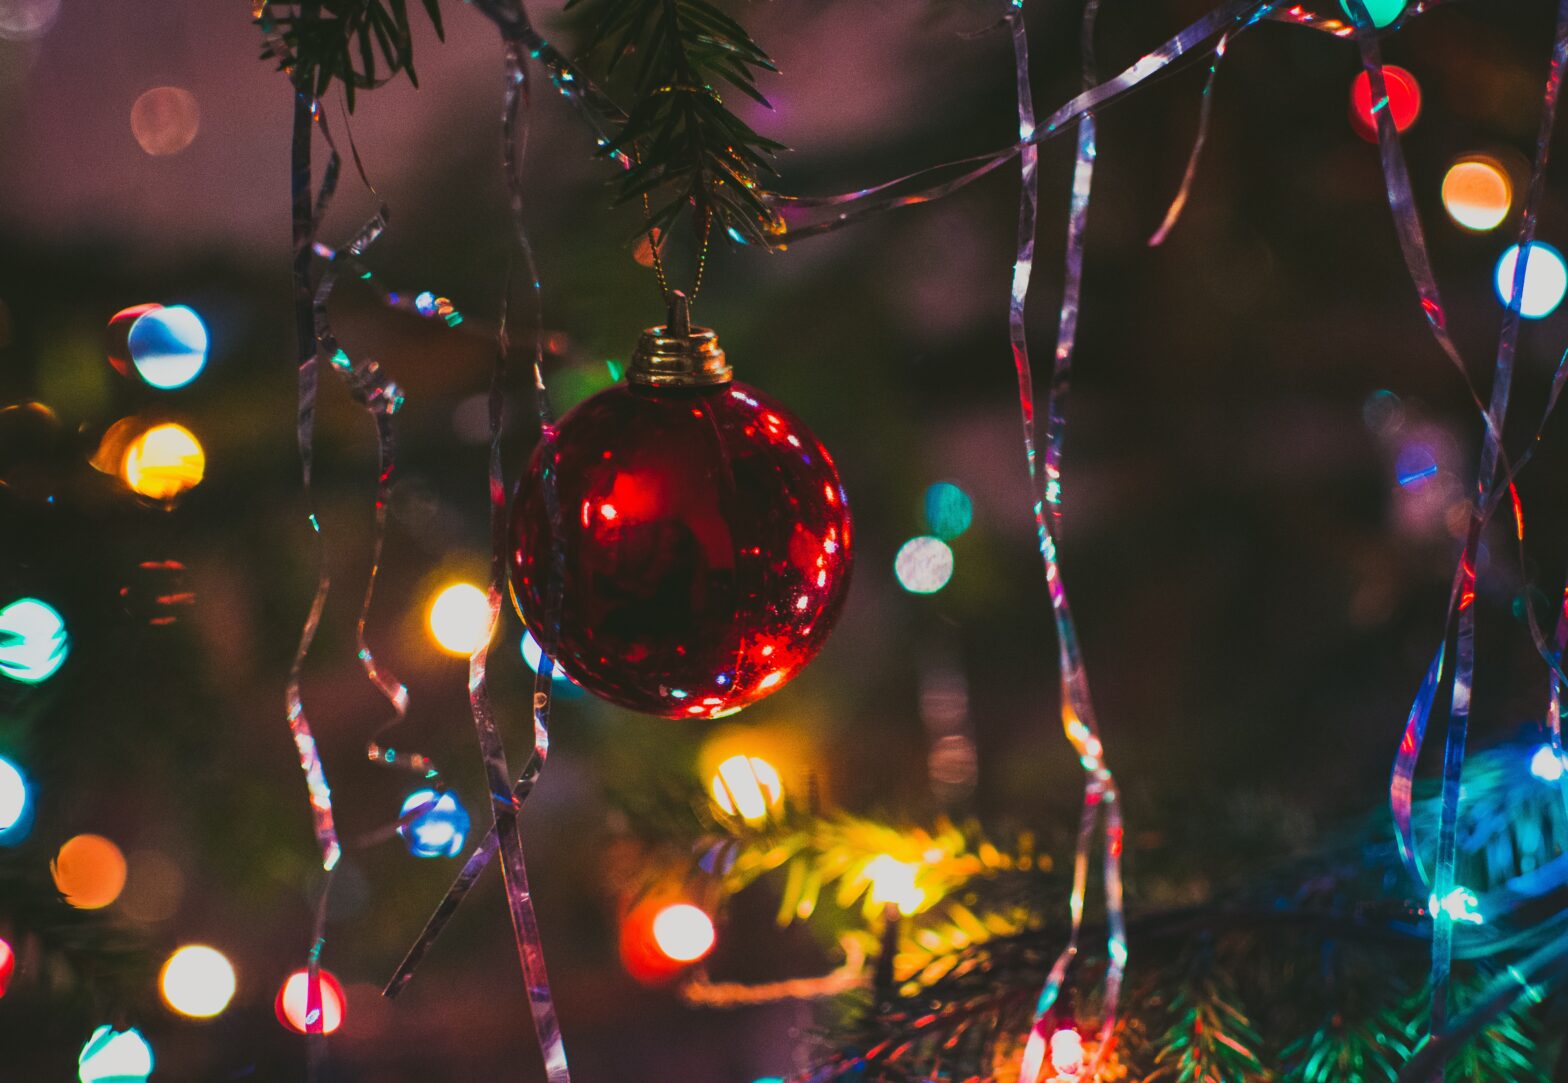 Image of a bauble with lights in the background